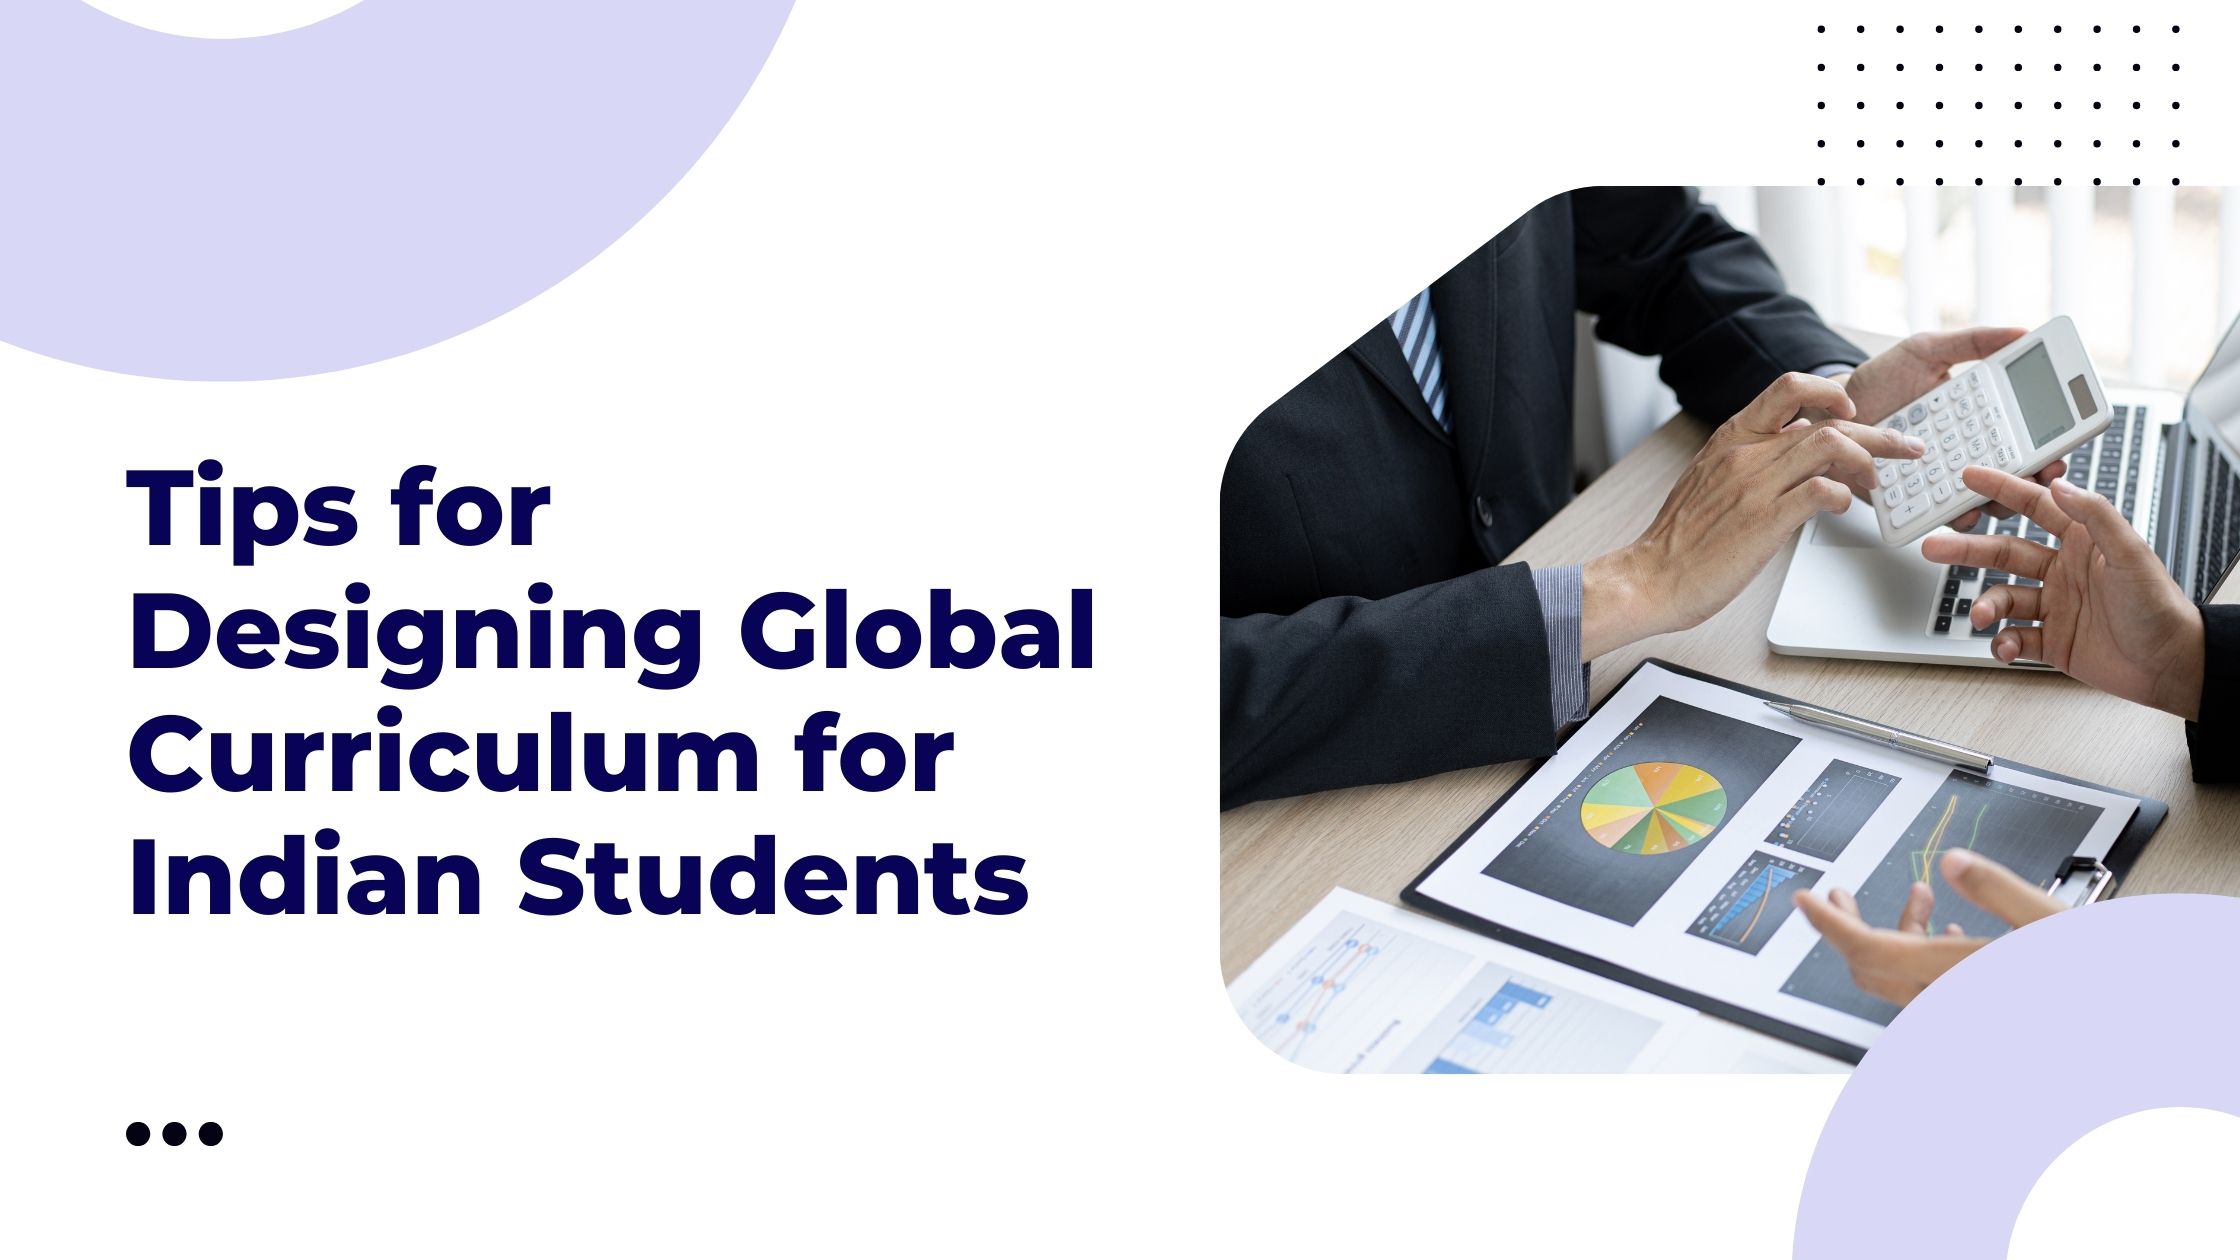 Designing Global Curriculum for Indian Students Key Tips